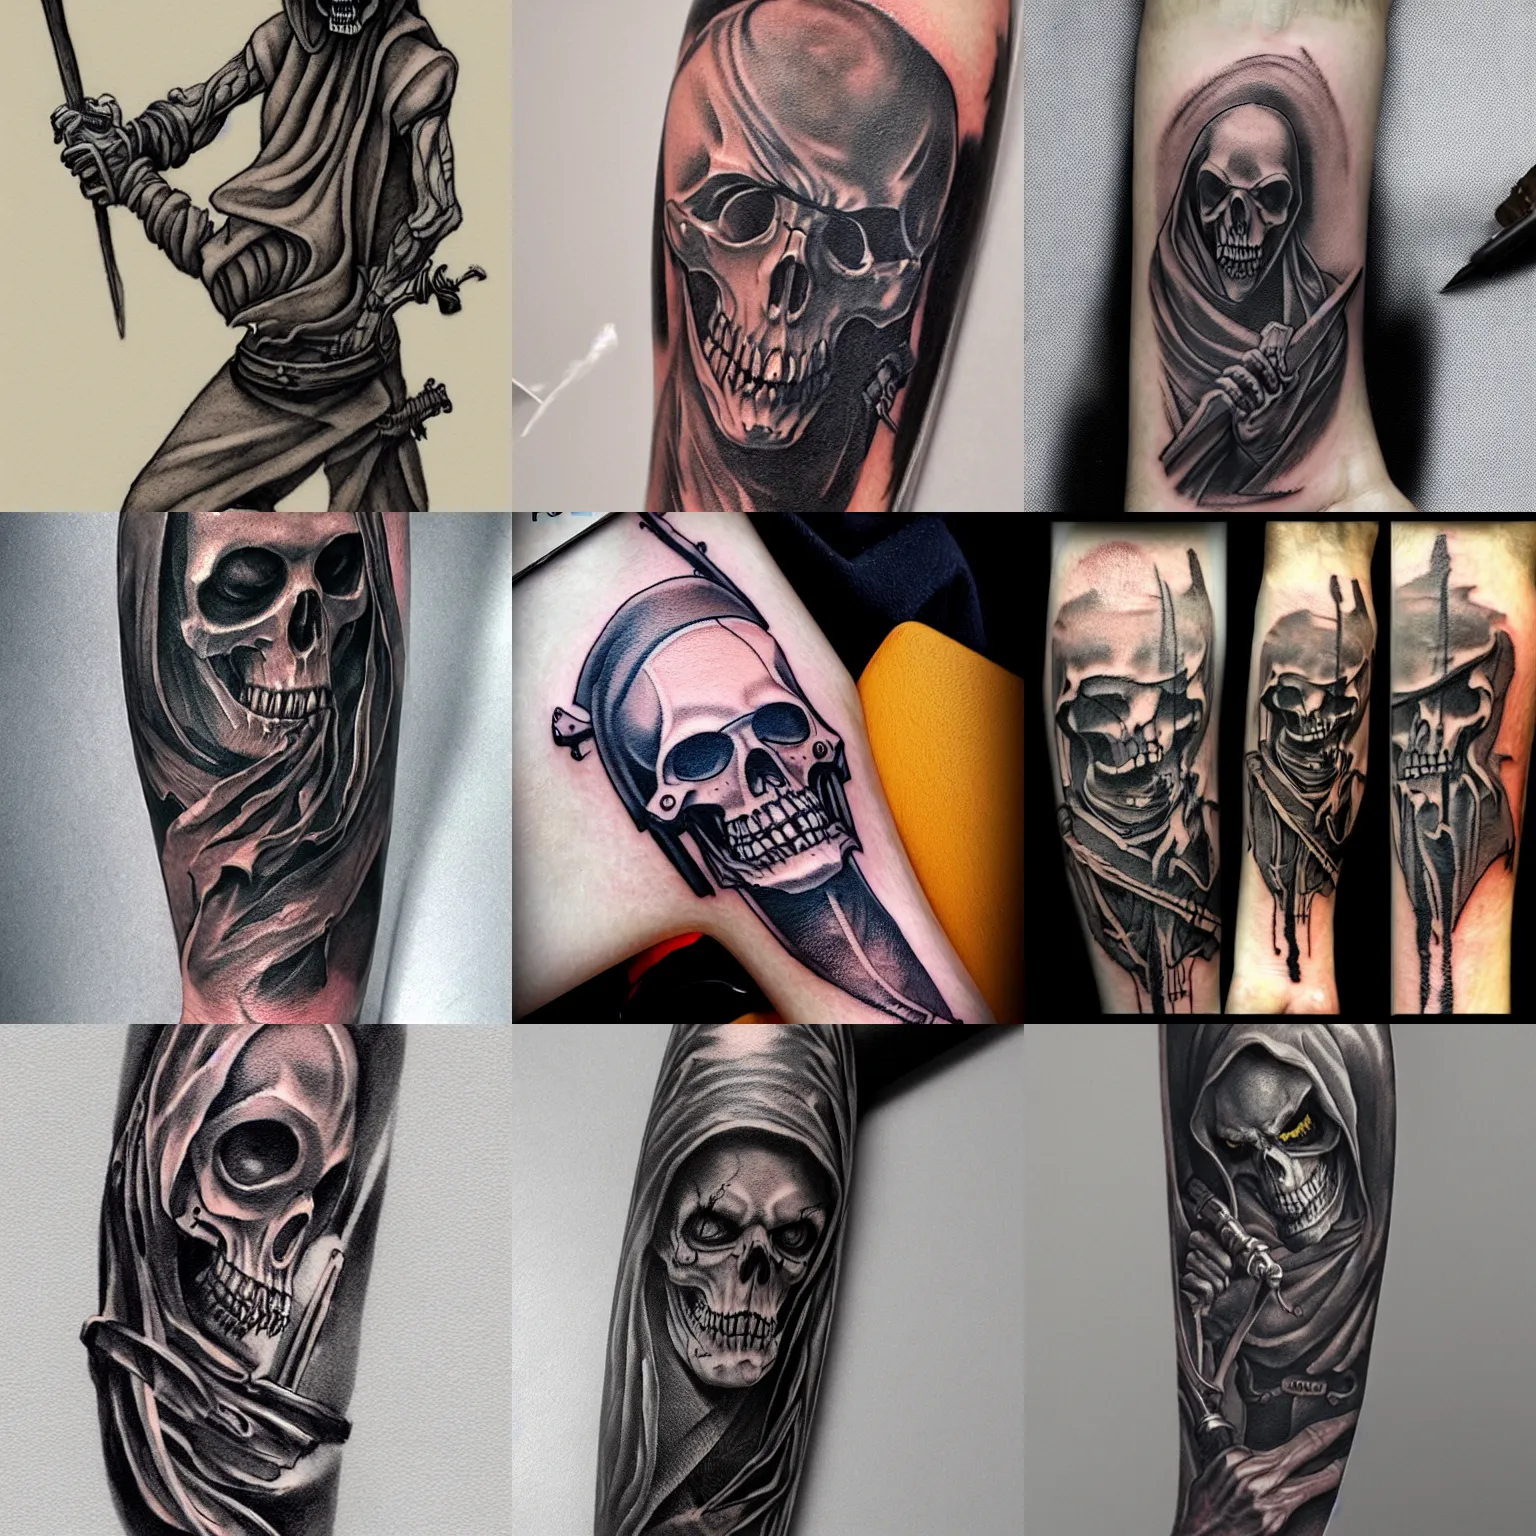 The grim reaper tattoo (Friday 13th party) | Miguel Angel Cu… | Flickr